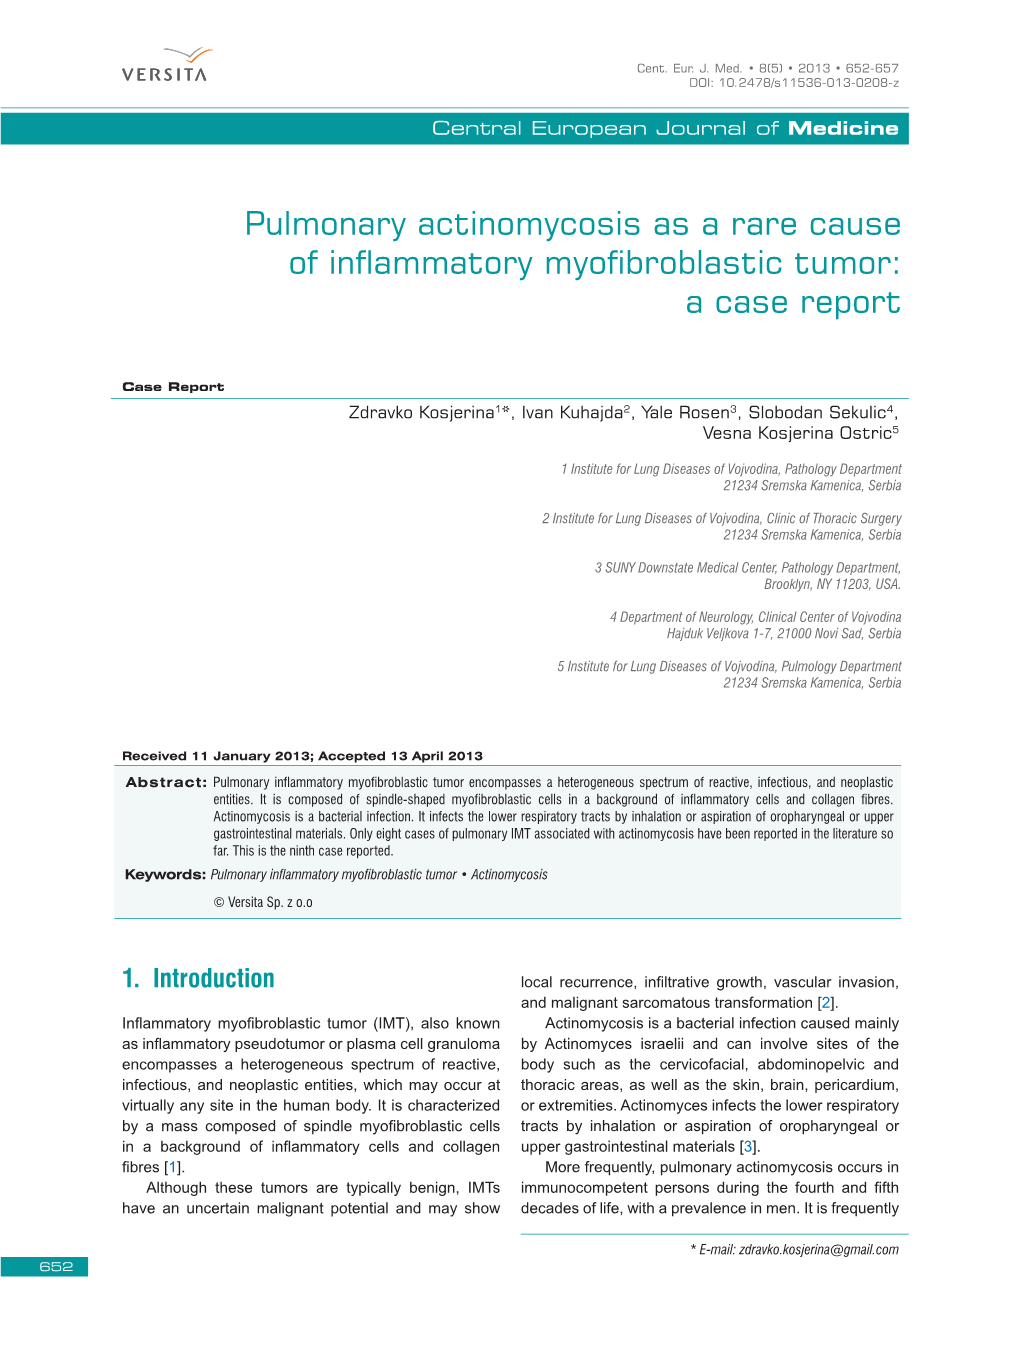 Pulmonary Actinomycosis As a Rare Cause of Inflammatory Myofibroblastic Tumor: a Case Report